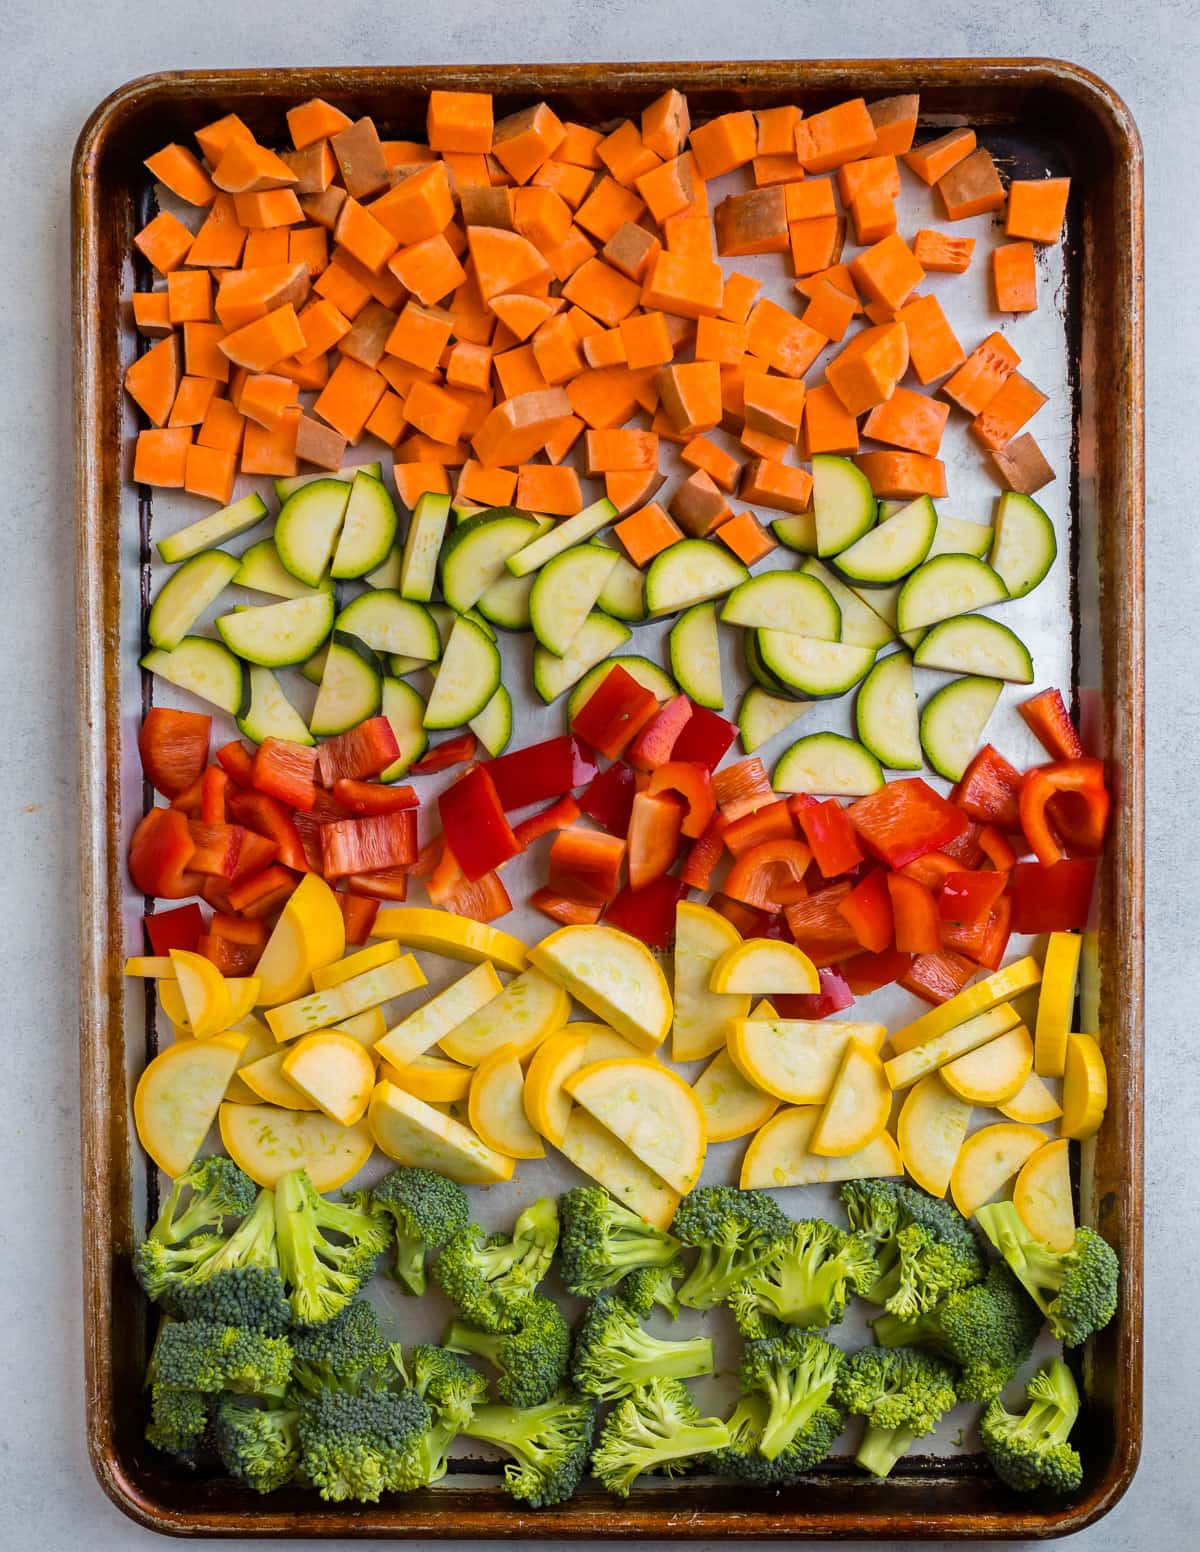 Chopped sweet potatoes, zucchini, peppers, squash, and broccoli on a baking sheet